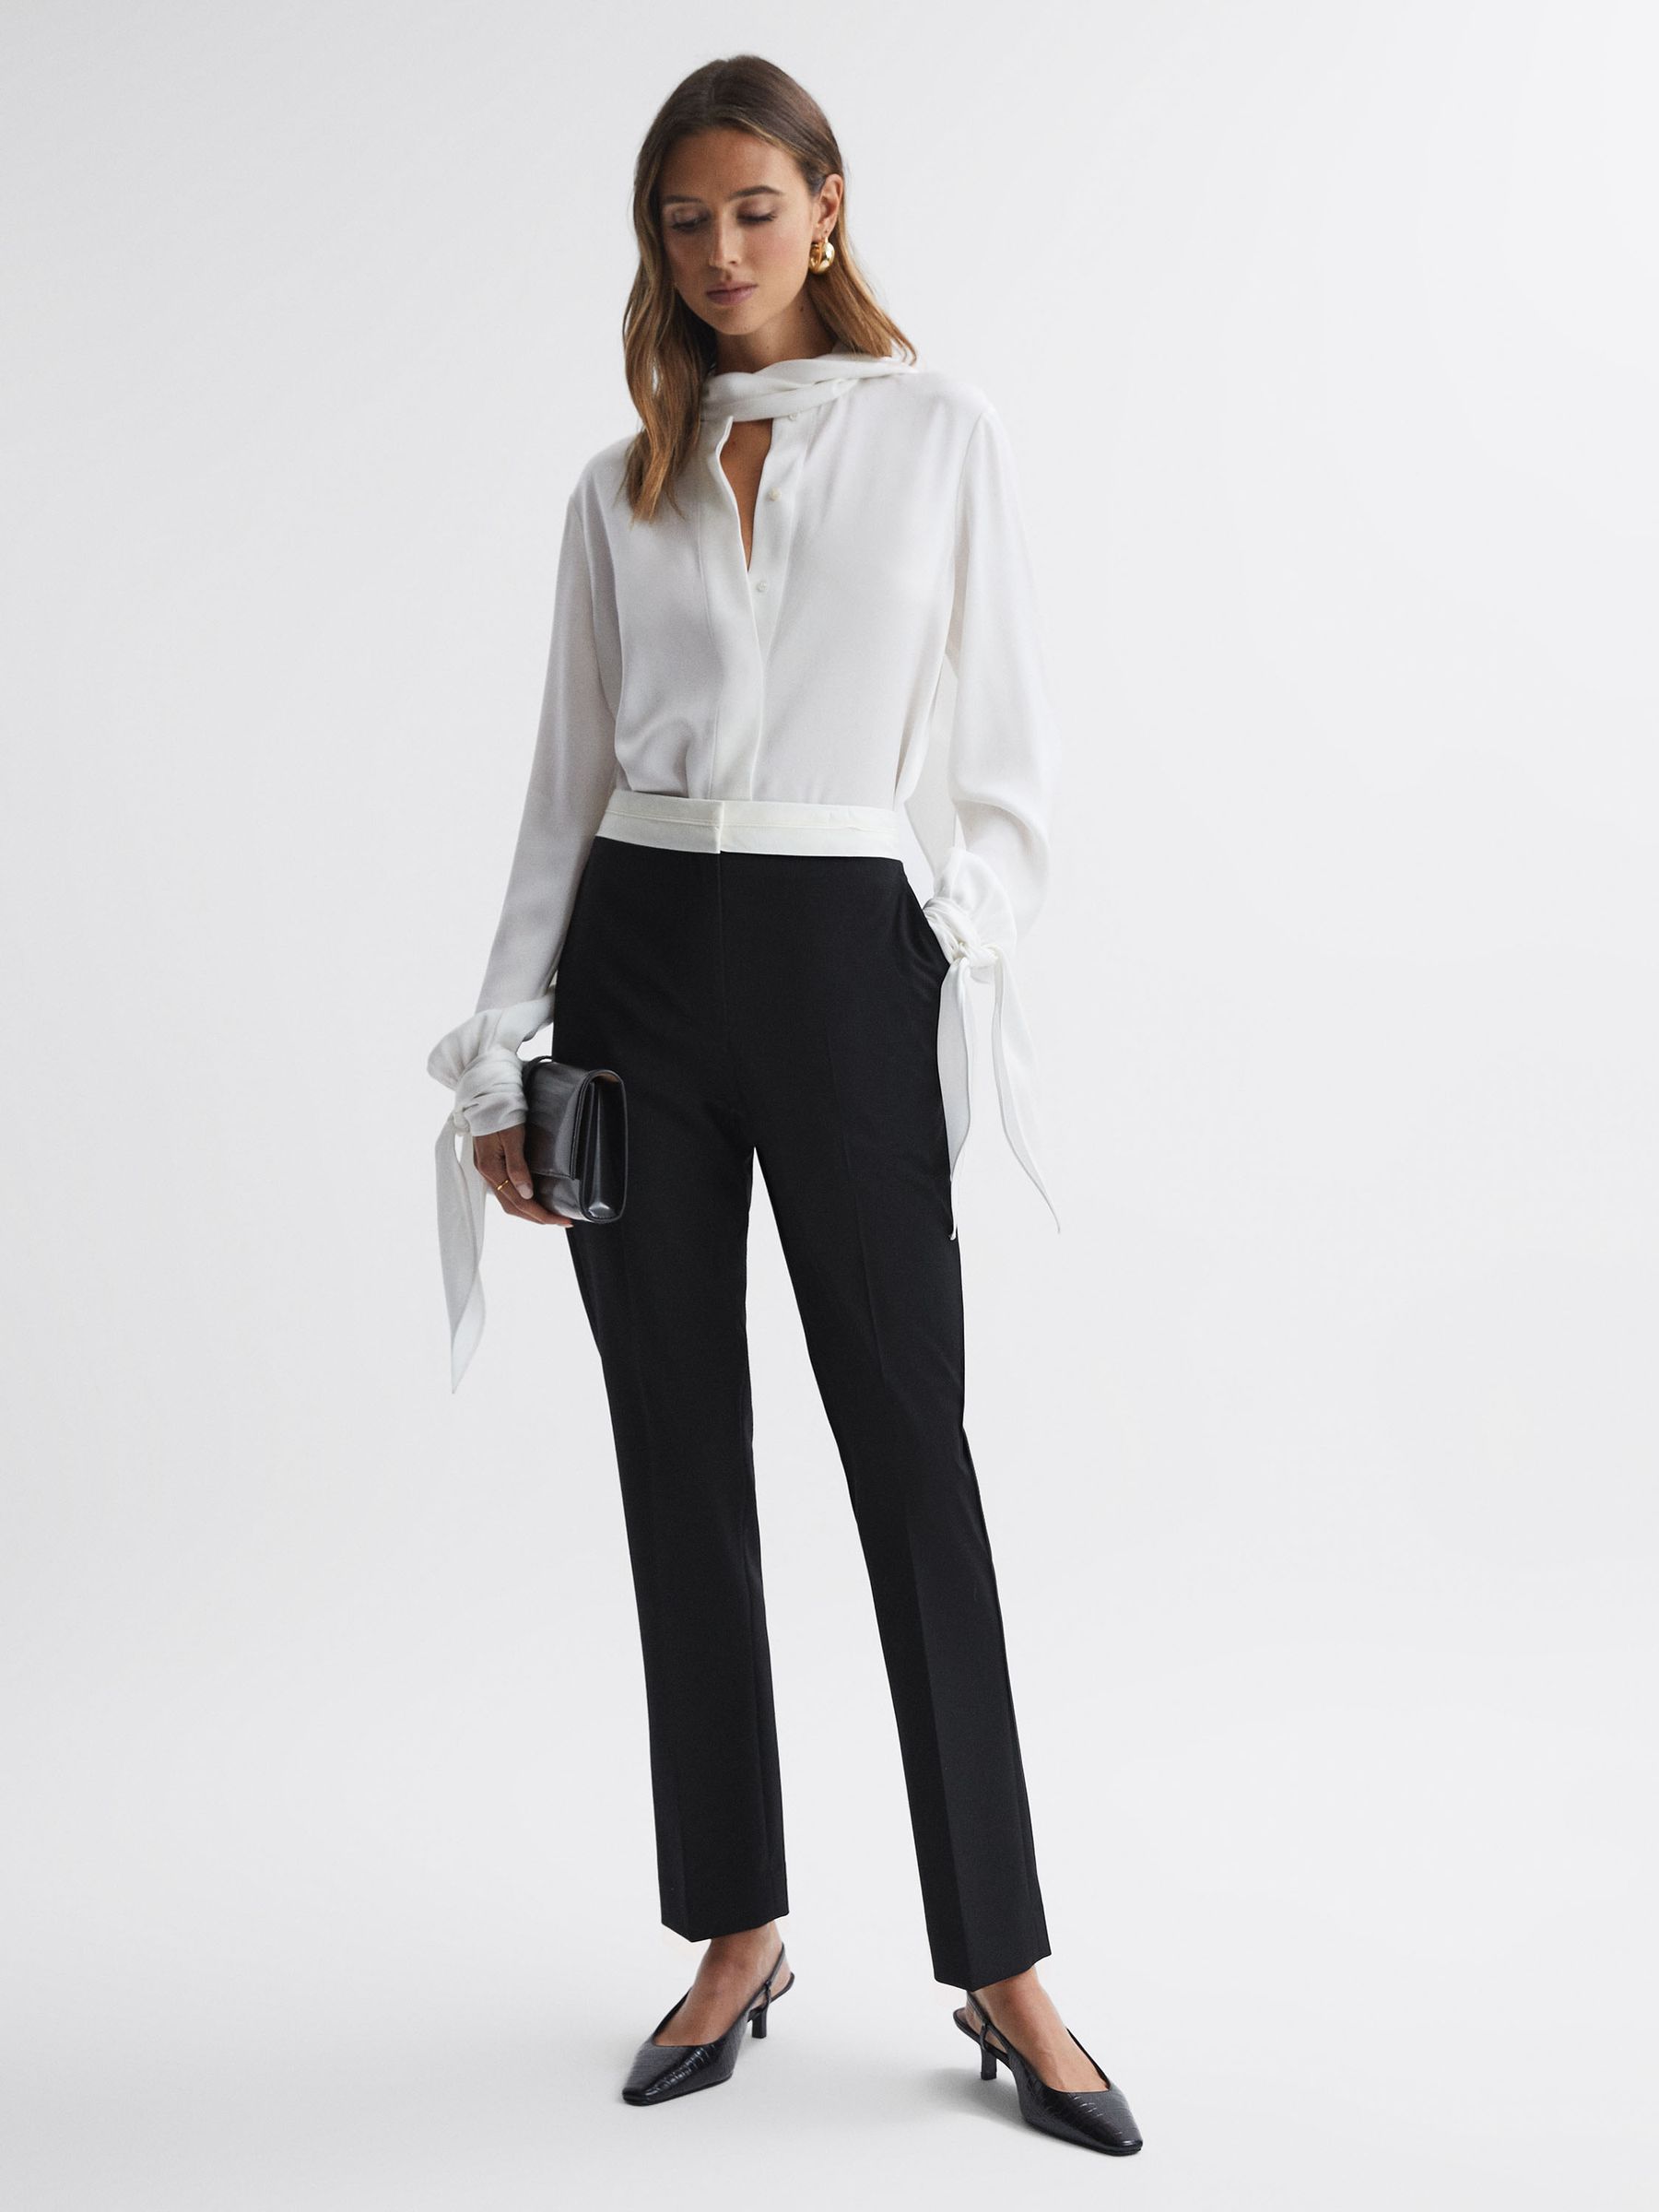 Reiss Olivia Tapered Contrast Waistband Trousers - REISS